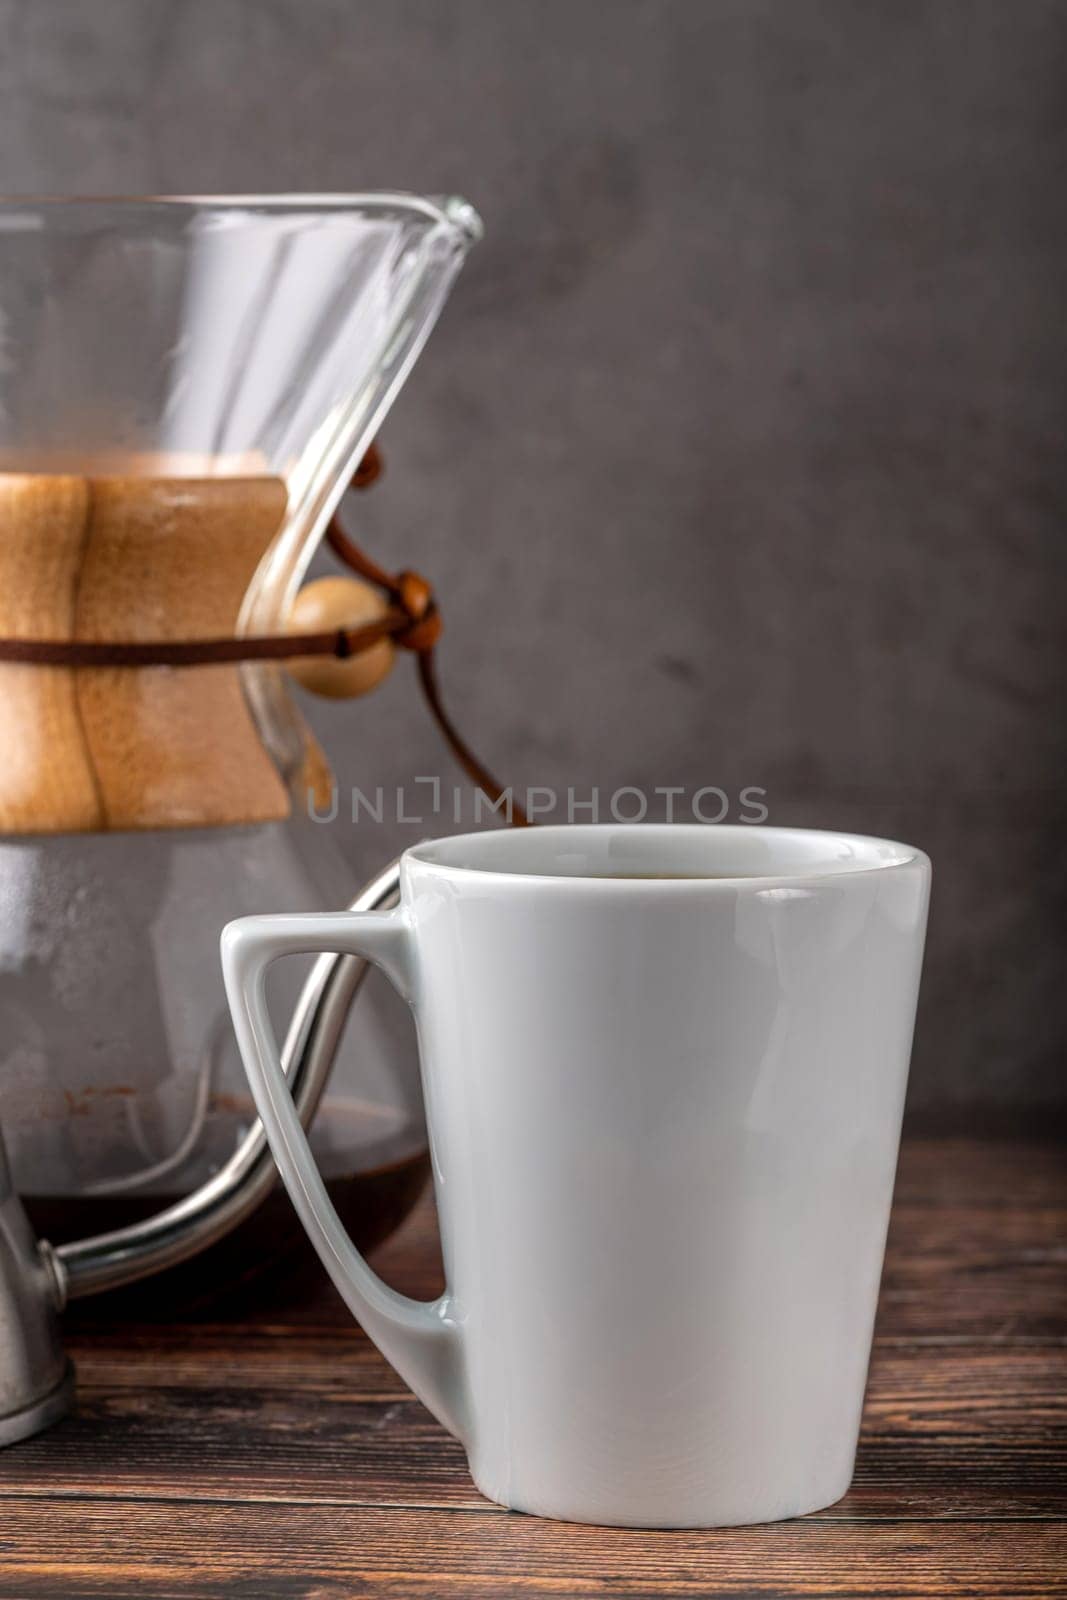 A cup of coffee and third generation pour over coffee brewing equipment on stone floor by Sonat